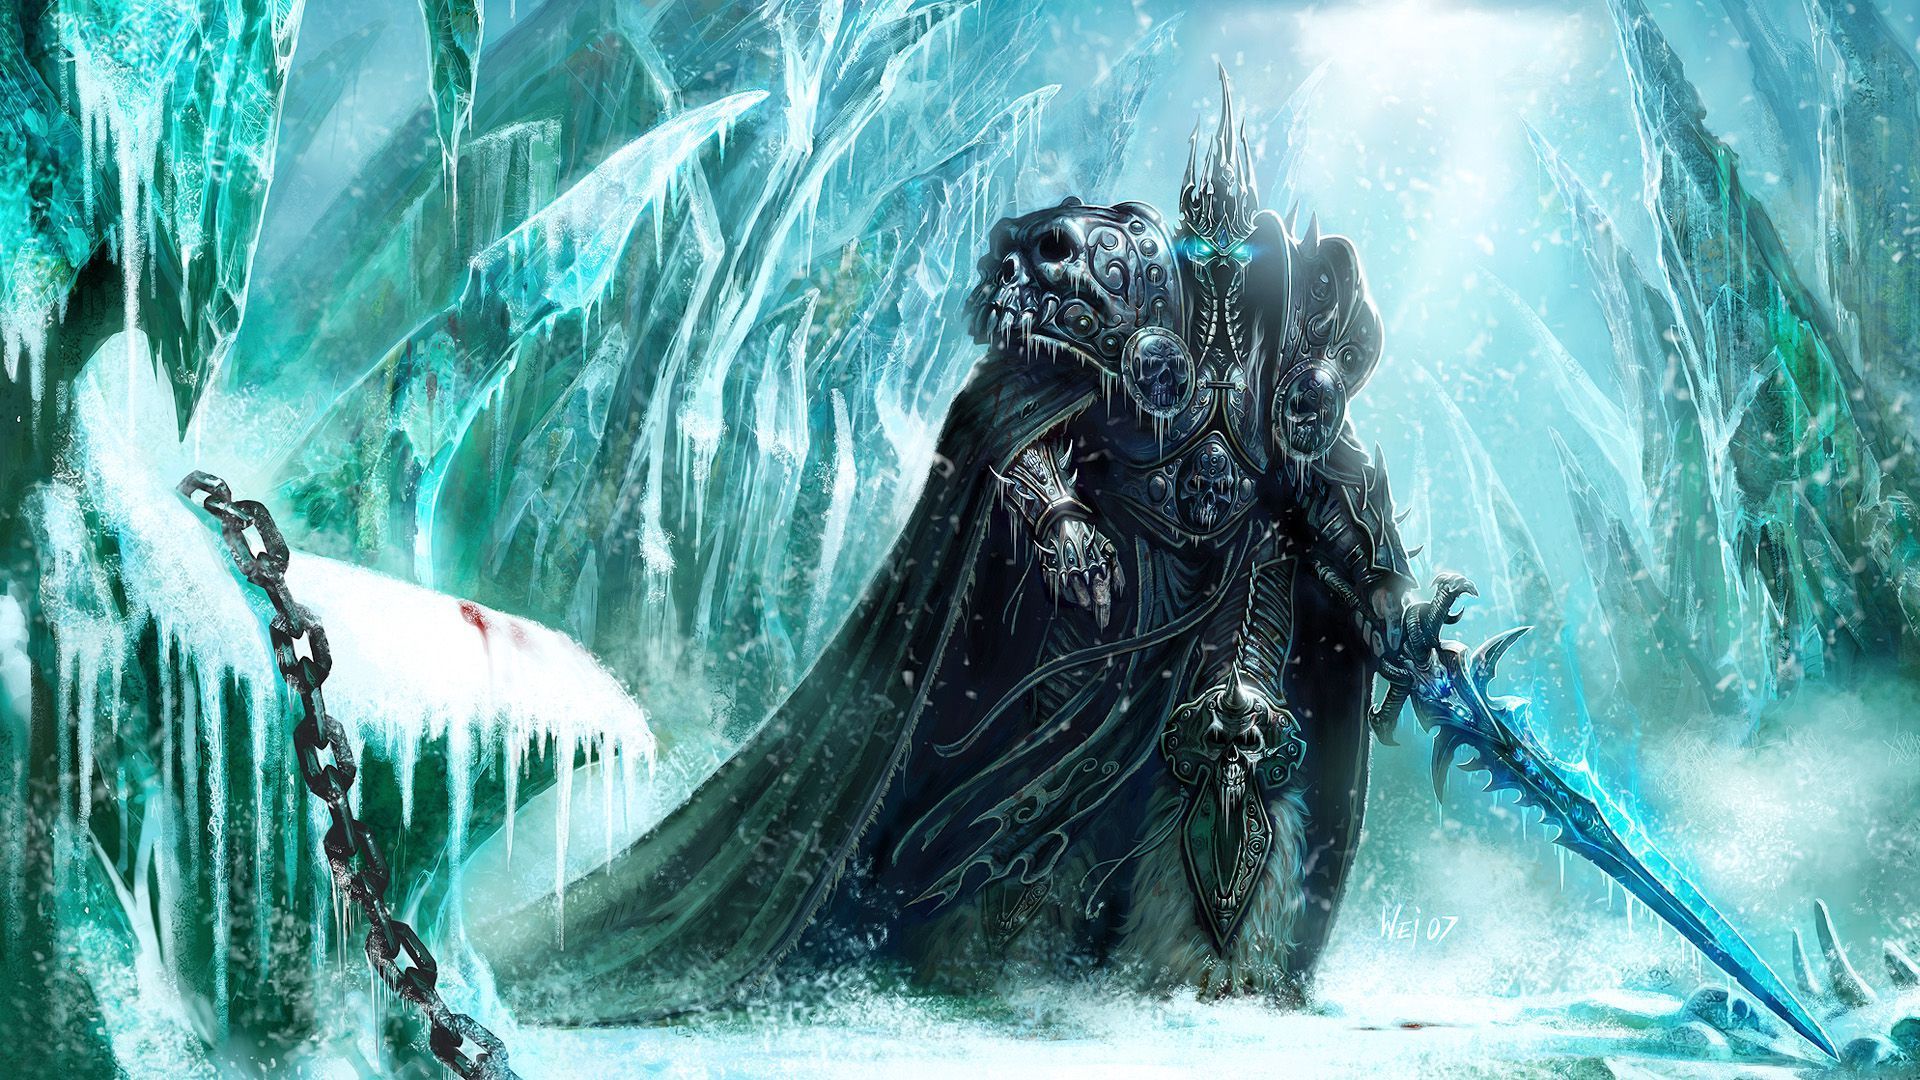 Wallpapers World Of Warcraft Armor Ice Sword 1920x1080